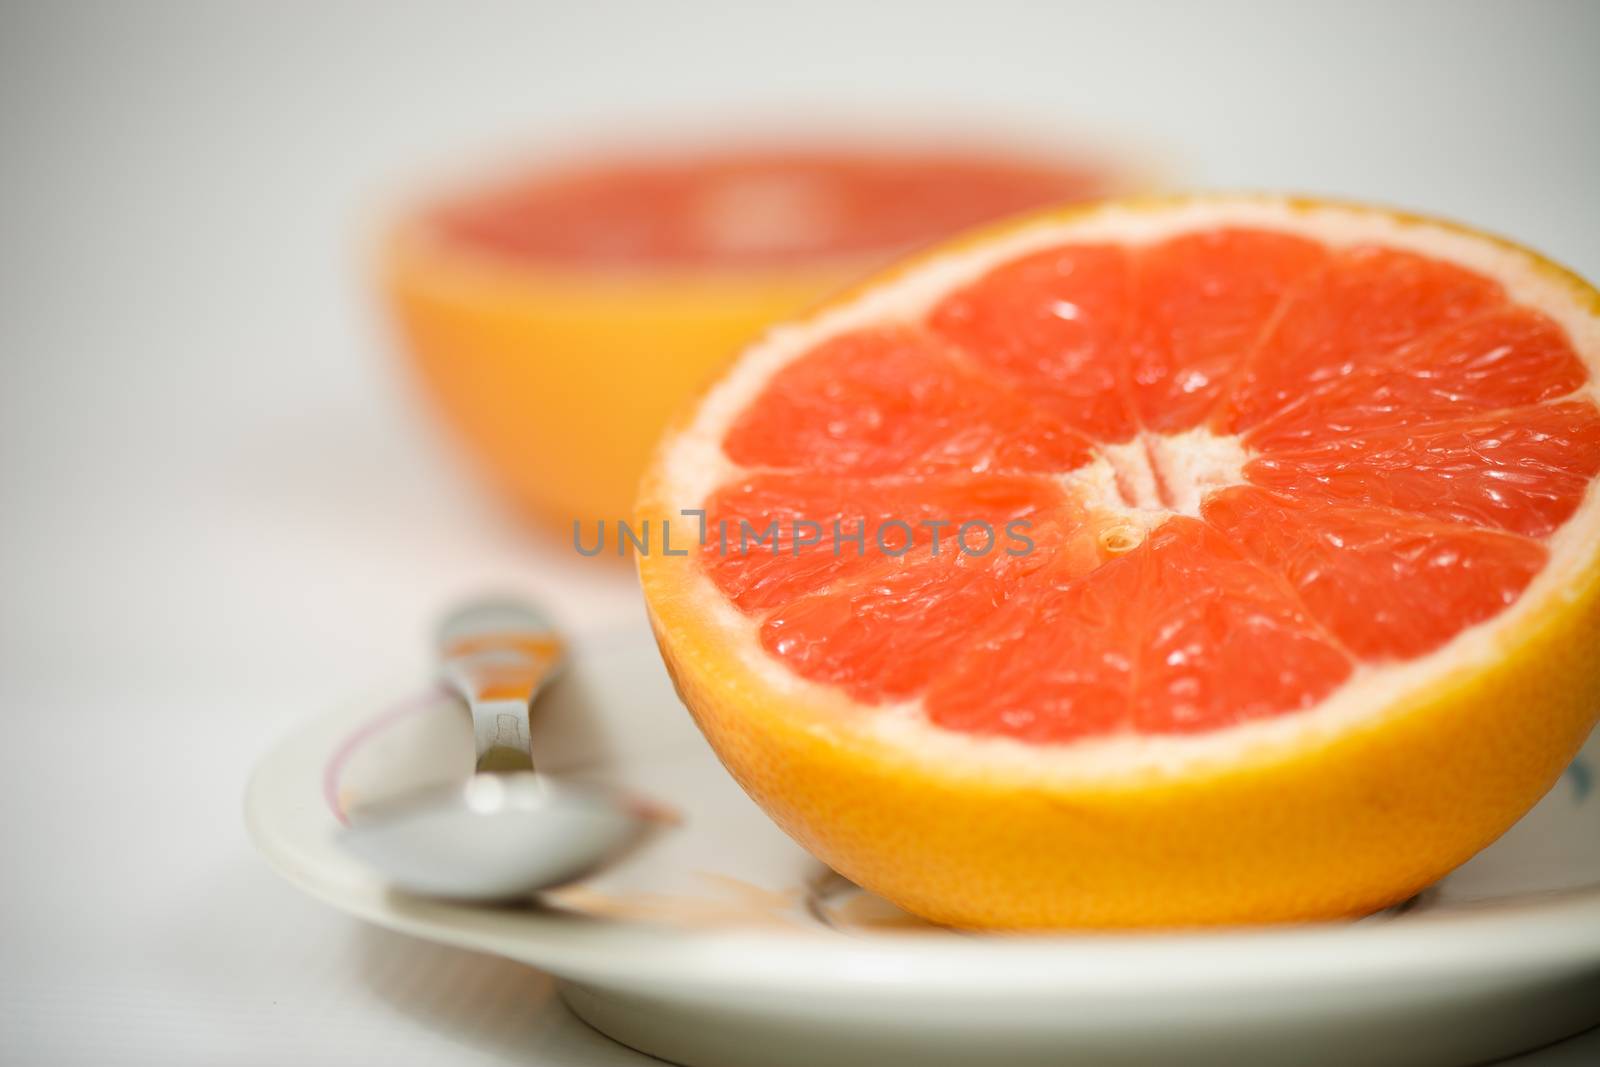 Halved red grapefruit on plate by MilanMarkovic78